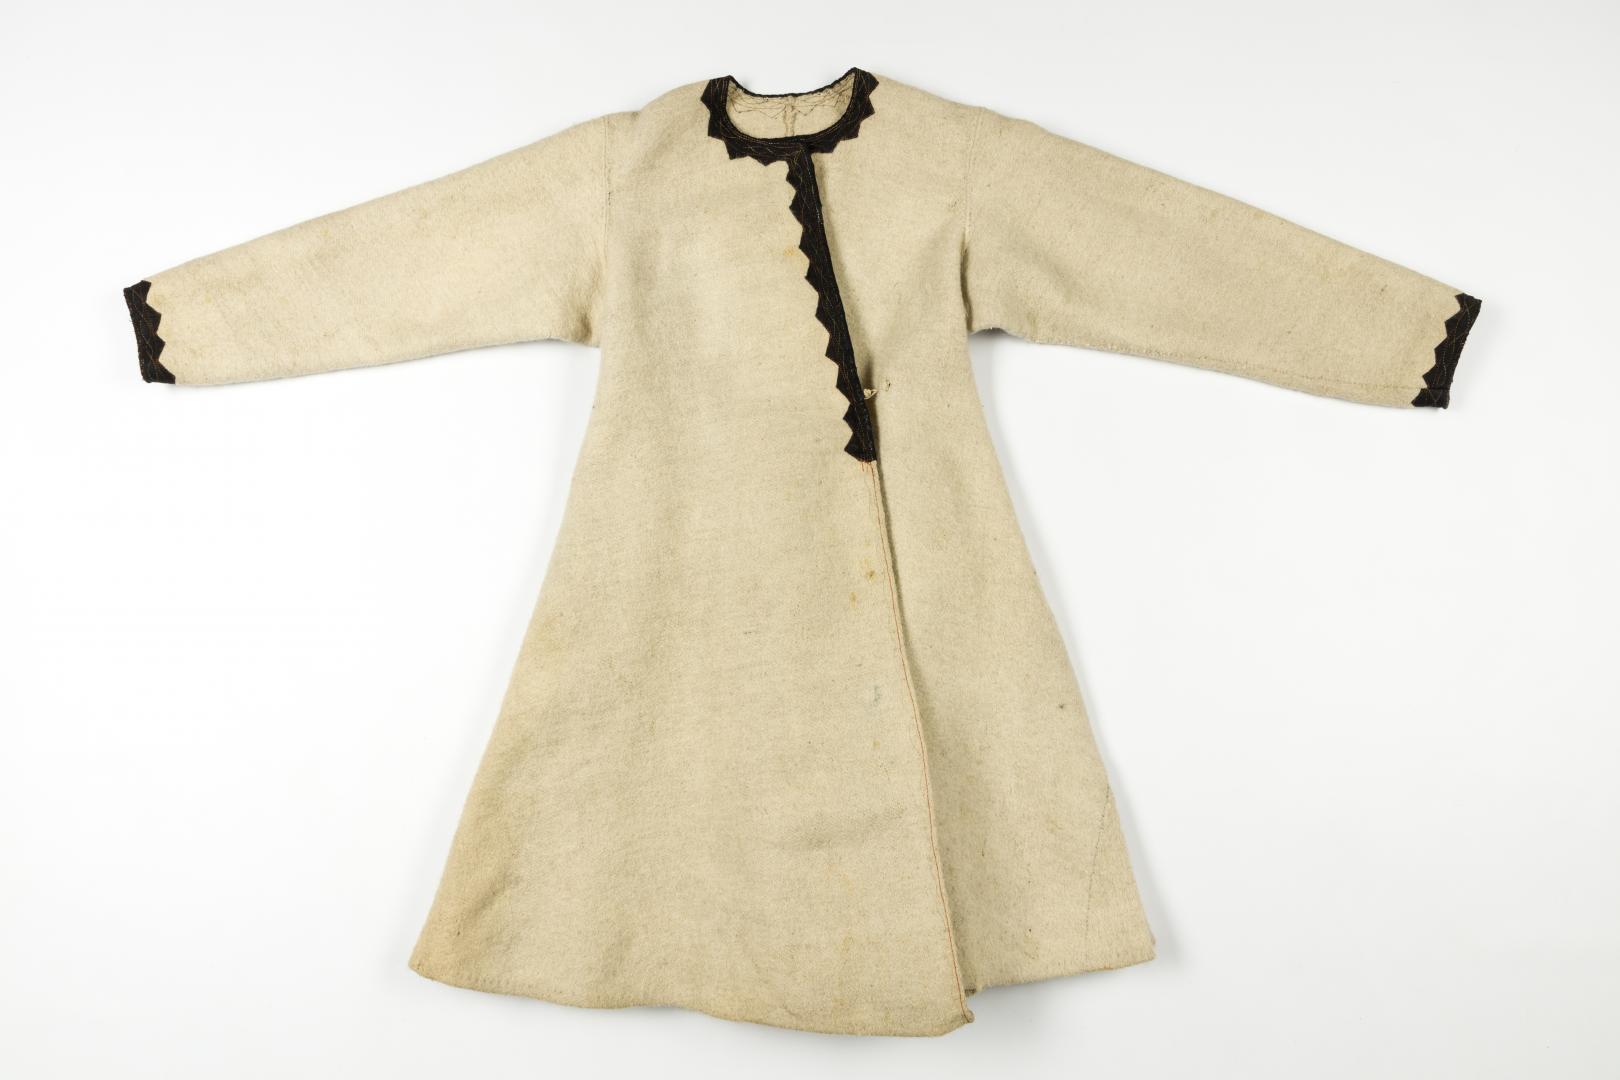 Svyta (embroidered women's coat made of white cloth)